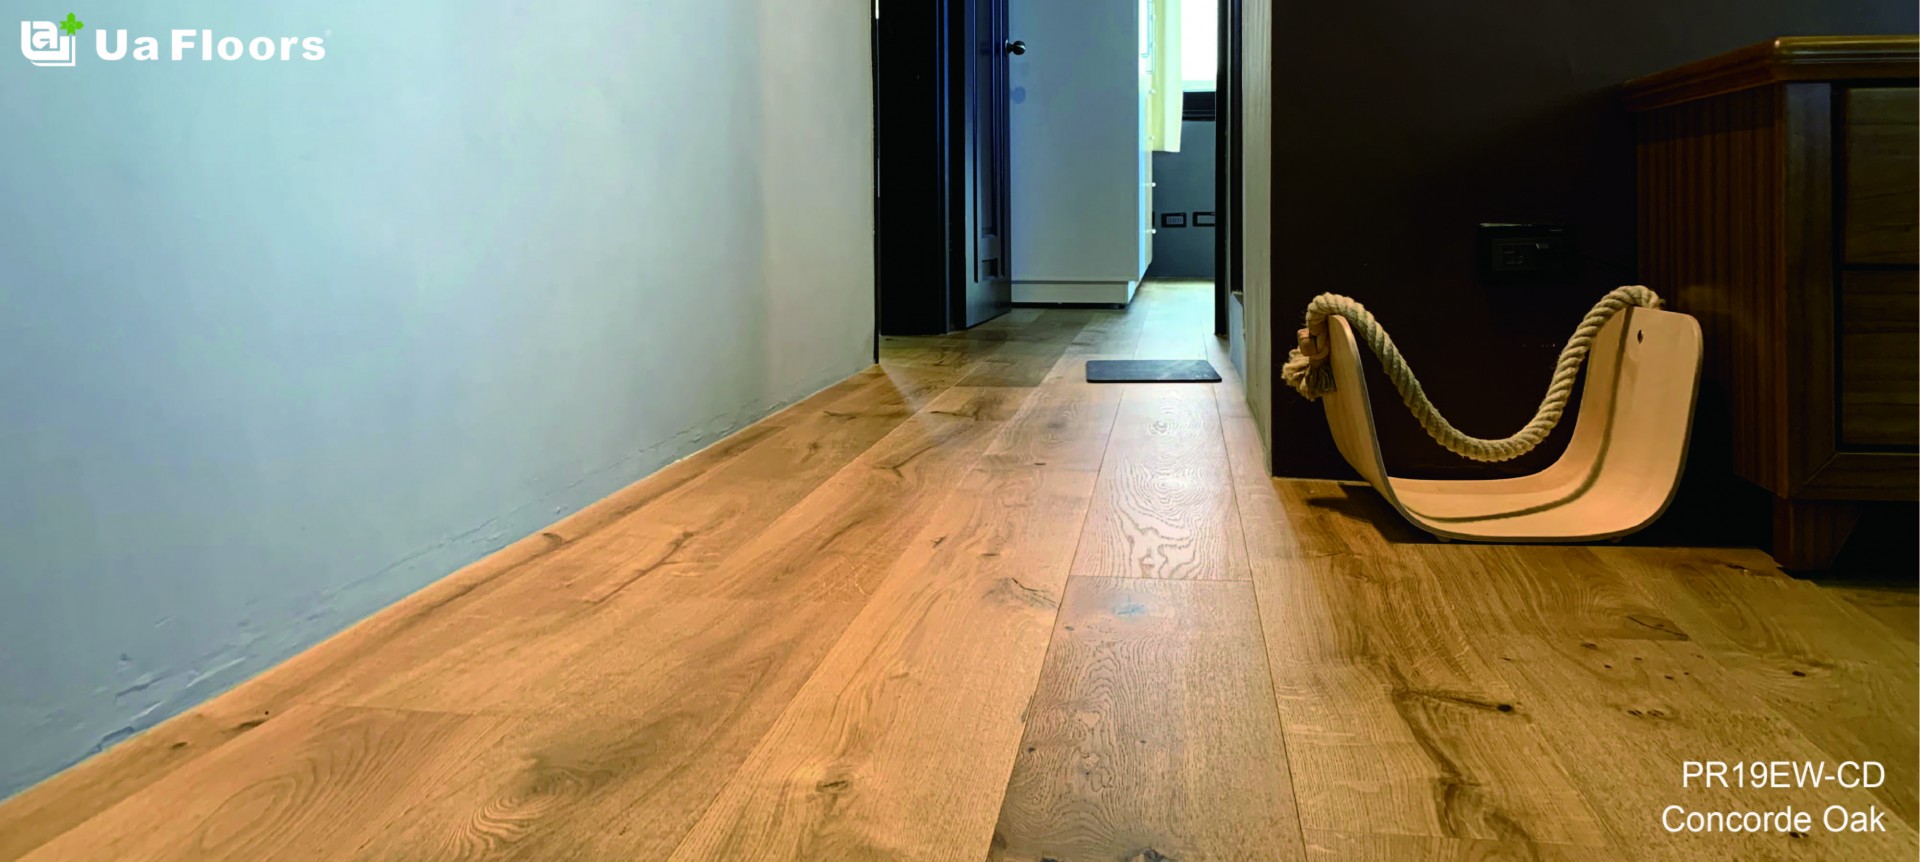 Ua Floors - PROJECTS|Elegance in the Fine Details｜Taiwan